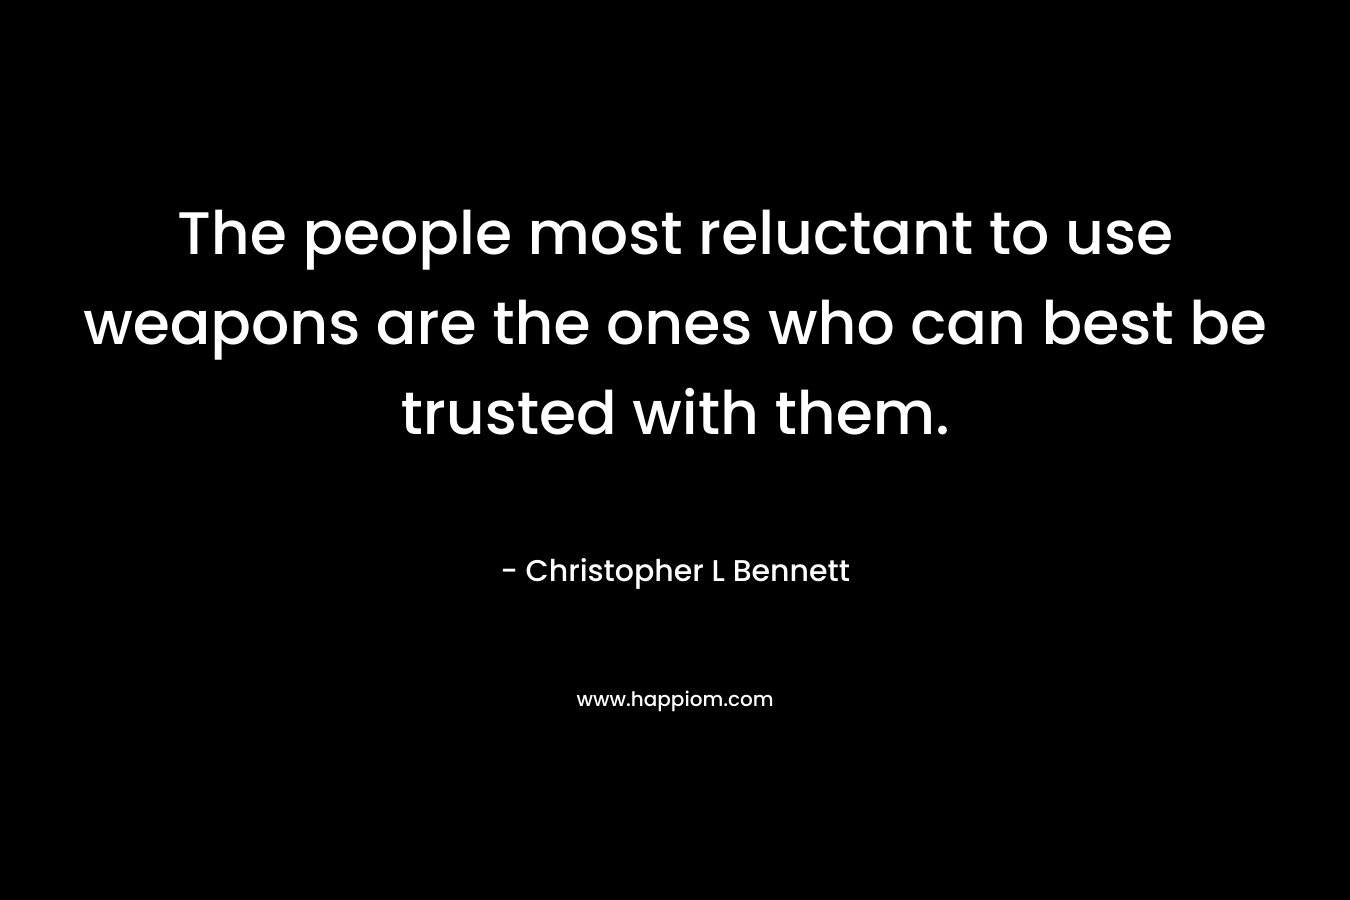 The people most reluctant to use weapons are the ones who can best be trusted with them. – Christopher L Bennett